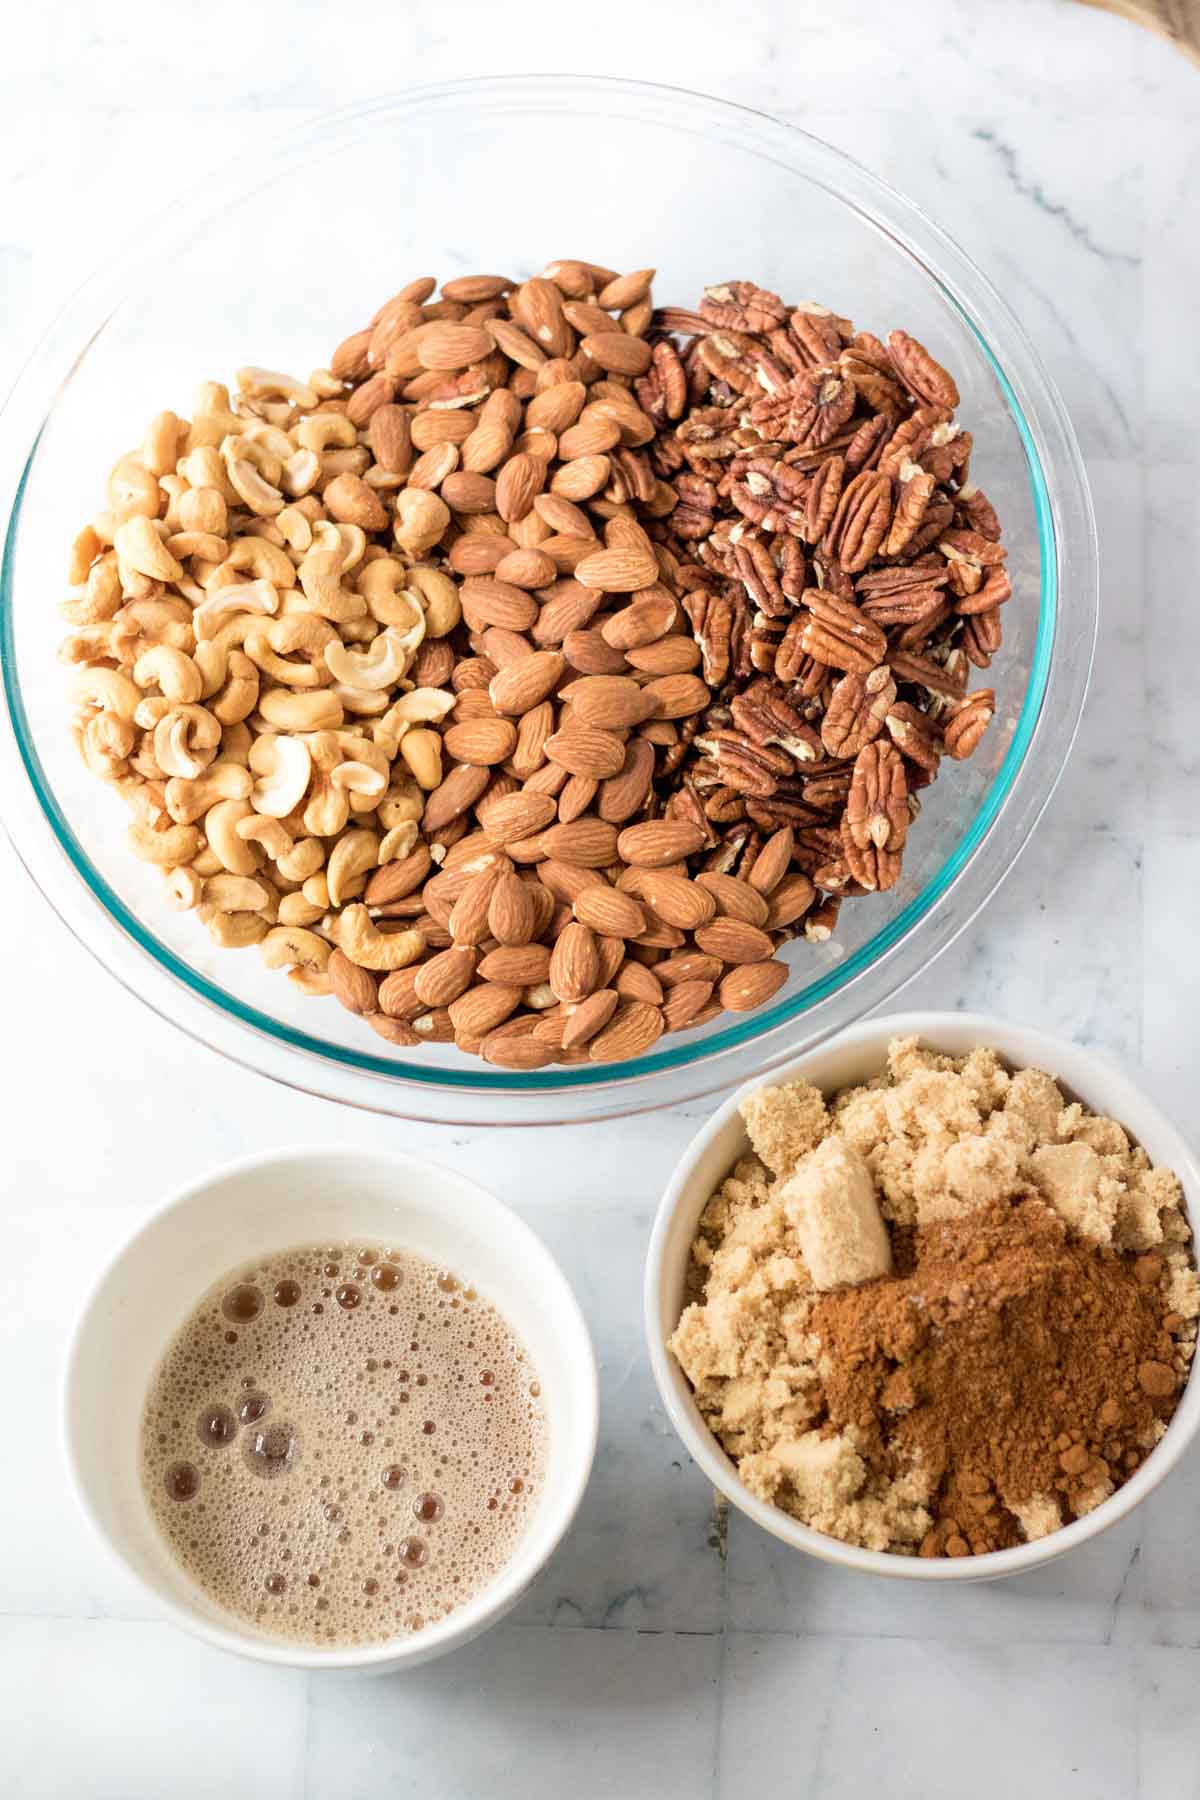 cinnamon sugar mixture next to a bowl of candied nuts